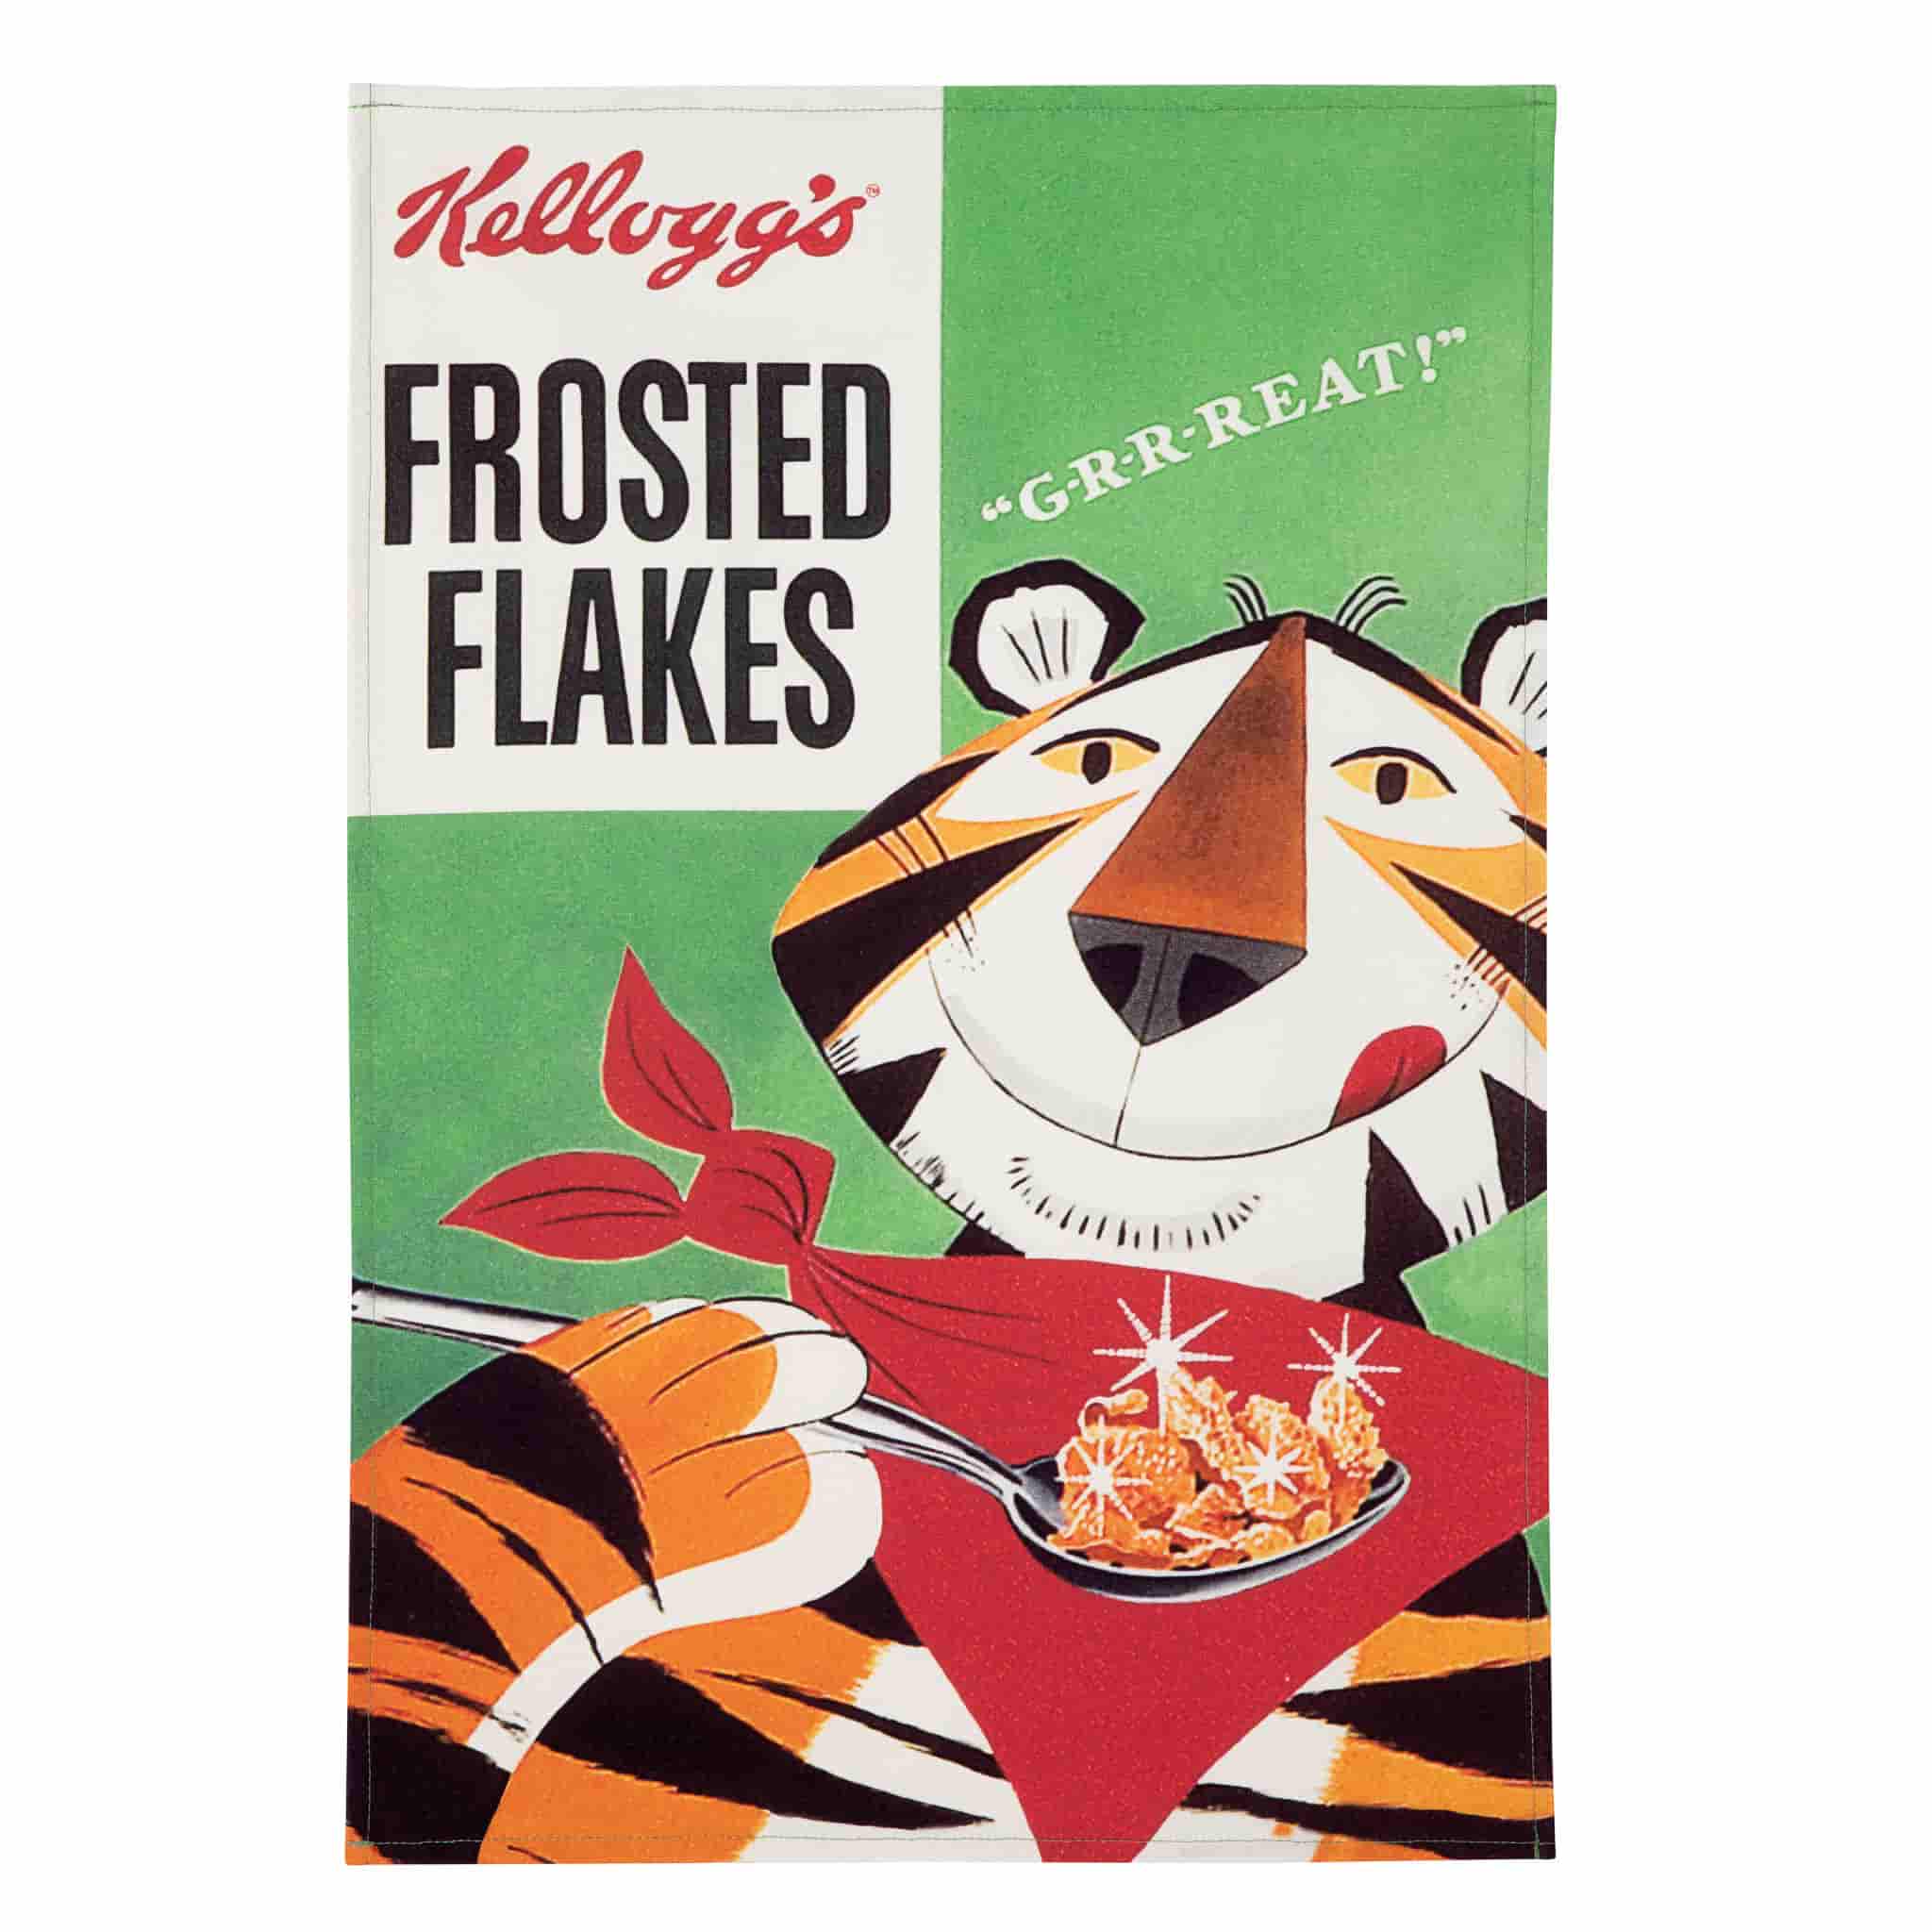 Kellogg's Original Corn Flakes & Frosted Flakes Tea Towels with Gift Box